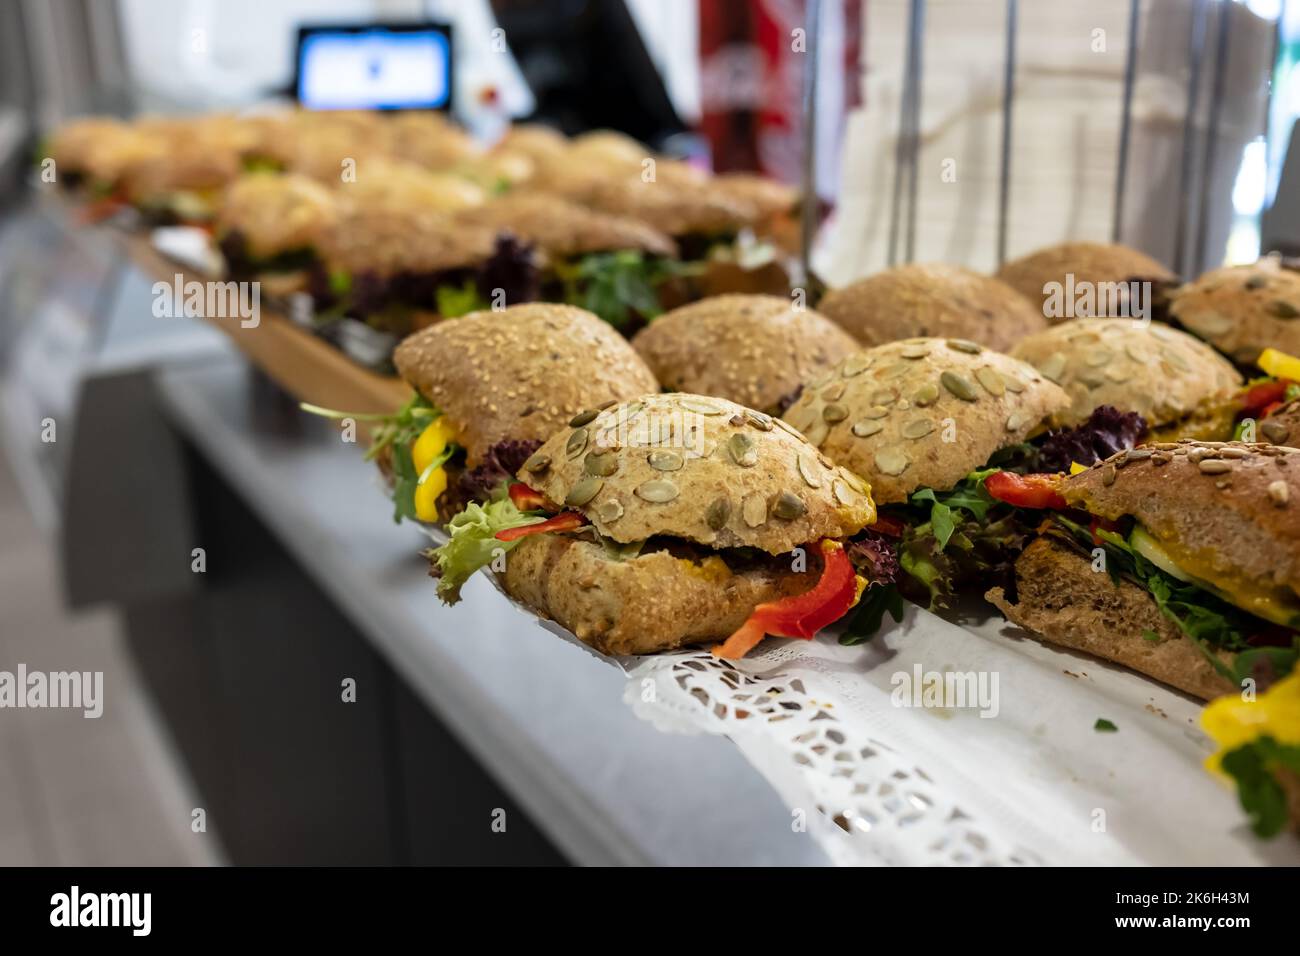 https://c8.alamy.com/comp/2K6H43M/lot-of-sesame-sandwiches-lie-on-the-counter-in-a-cafe-2K6H43M.jpg